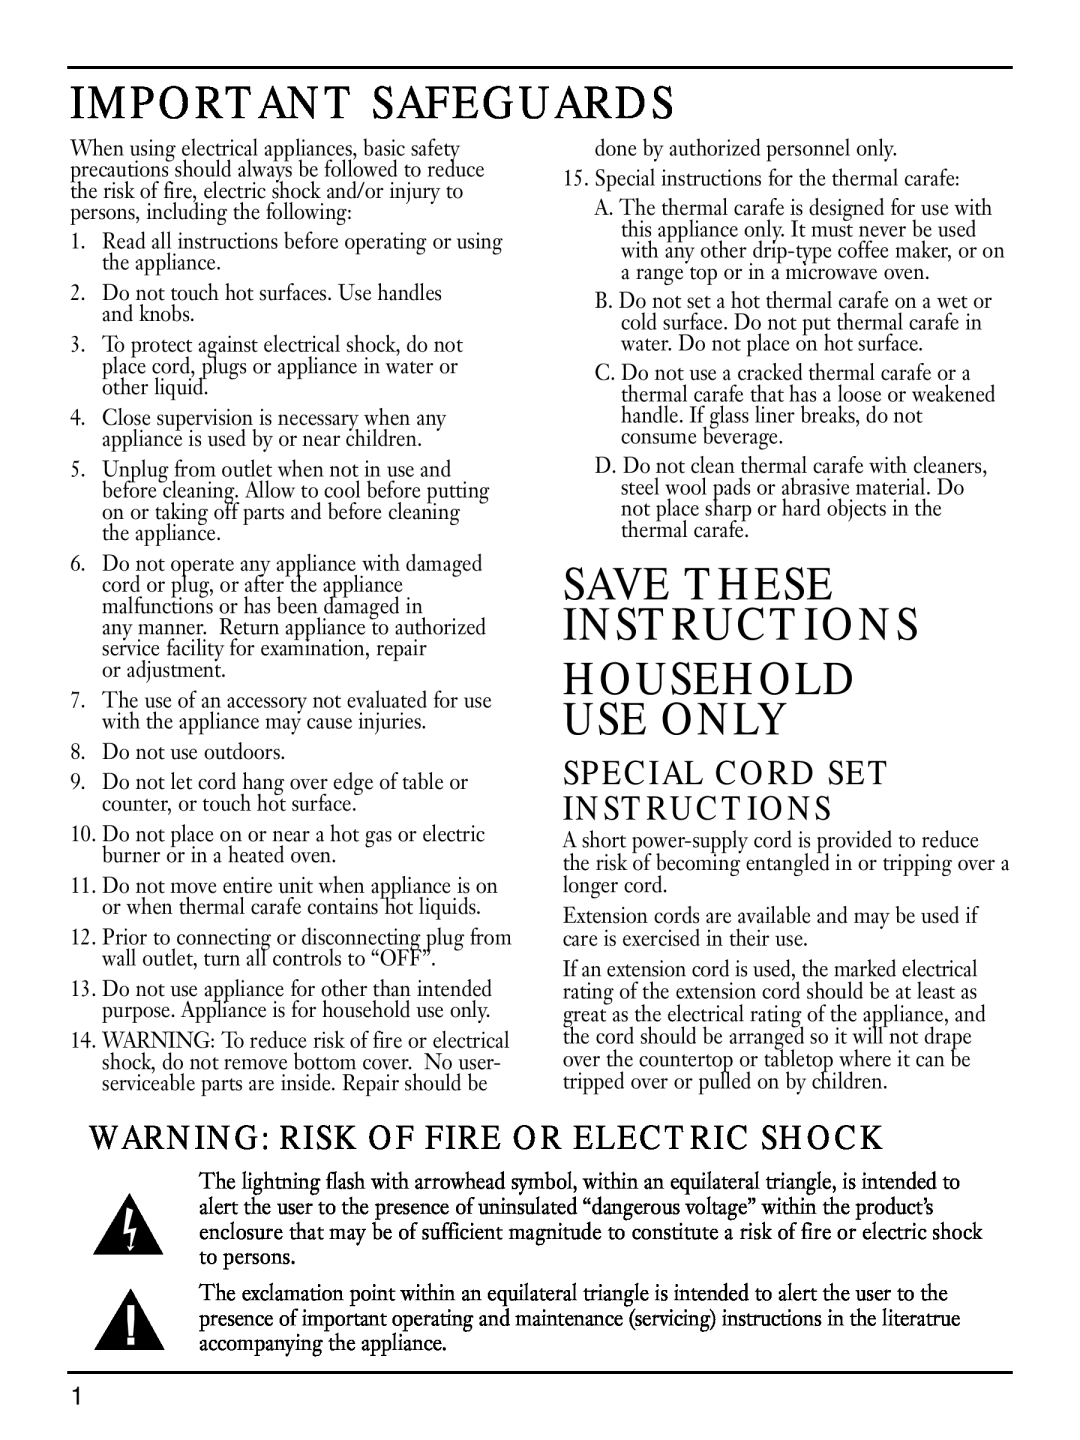 Cuisinart DTC-850 Series manual Special Cord Set Instructions, Warning Risk Of Fire Or Electric Shock, Important Safeguards 